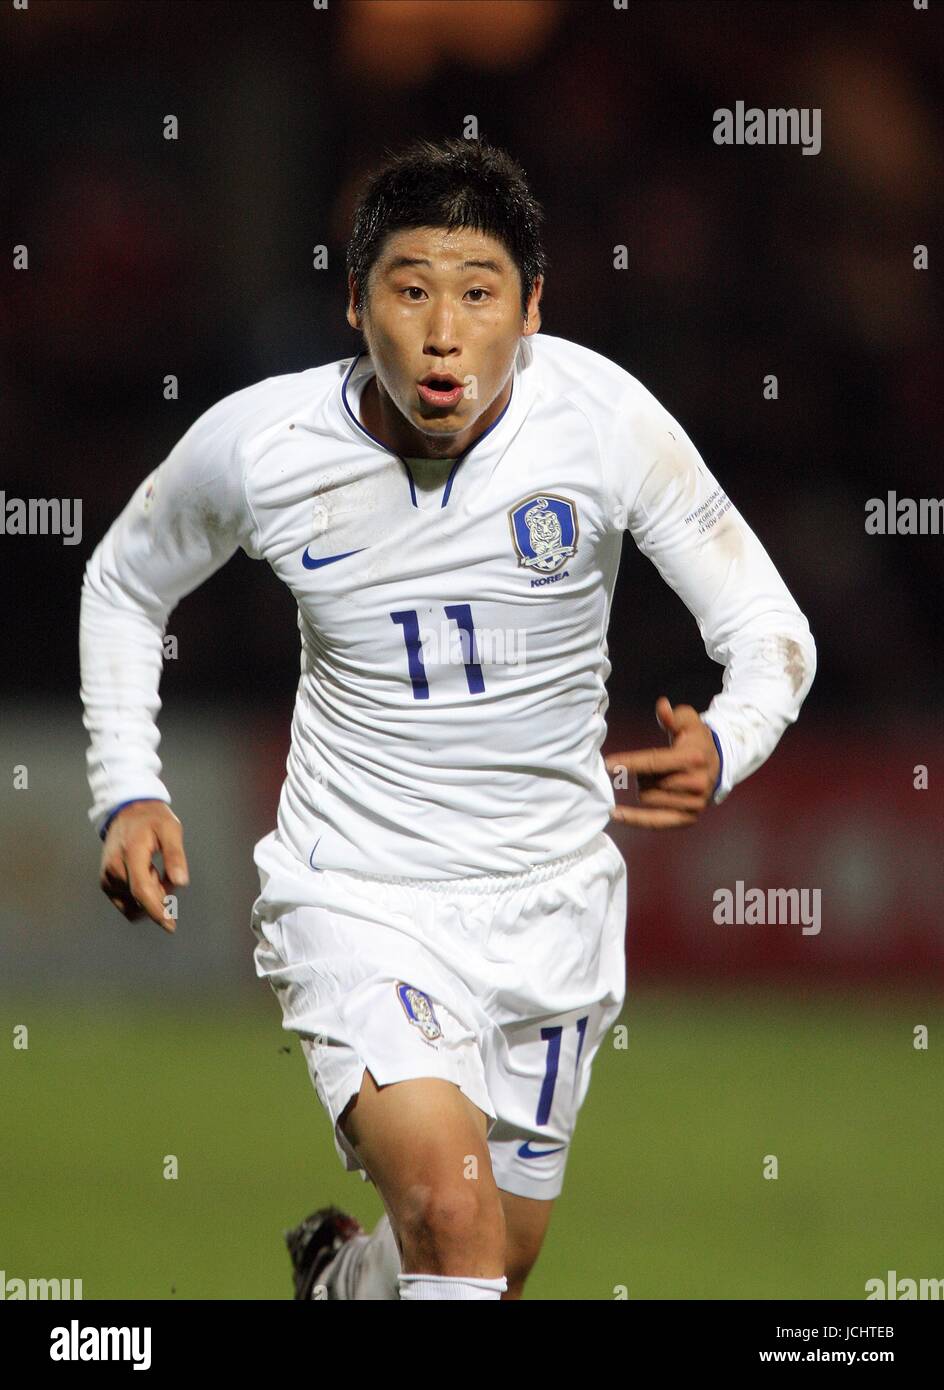 LEE KEUN-HO SOUTH KOREA DENMARK V SOUTH KOREA BLUE WATER STADIUM,ESJBERG,DENMARK 14 November 2009 GAA3468     WARNING! This Photograph May Only Be Used For Newspaper And/Or Magazine Editorial Purposes. May Not Be Used For, Internet/Online Usage Nor For Publications Involving 1 player, 1 Club Or 1 Competition, Without Written Authorisation From Football DataCo Ltd. For Any Queries, Please Contact Football DataCo Ltd on +44 (0) 207 864 9121 Stock Photo